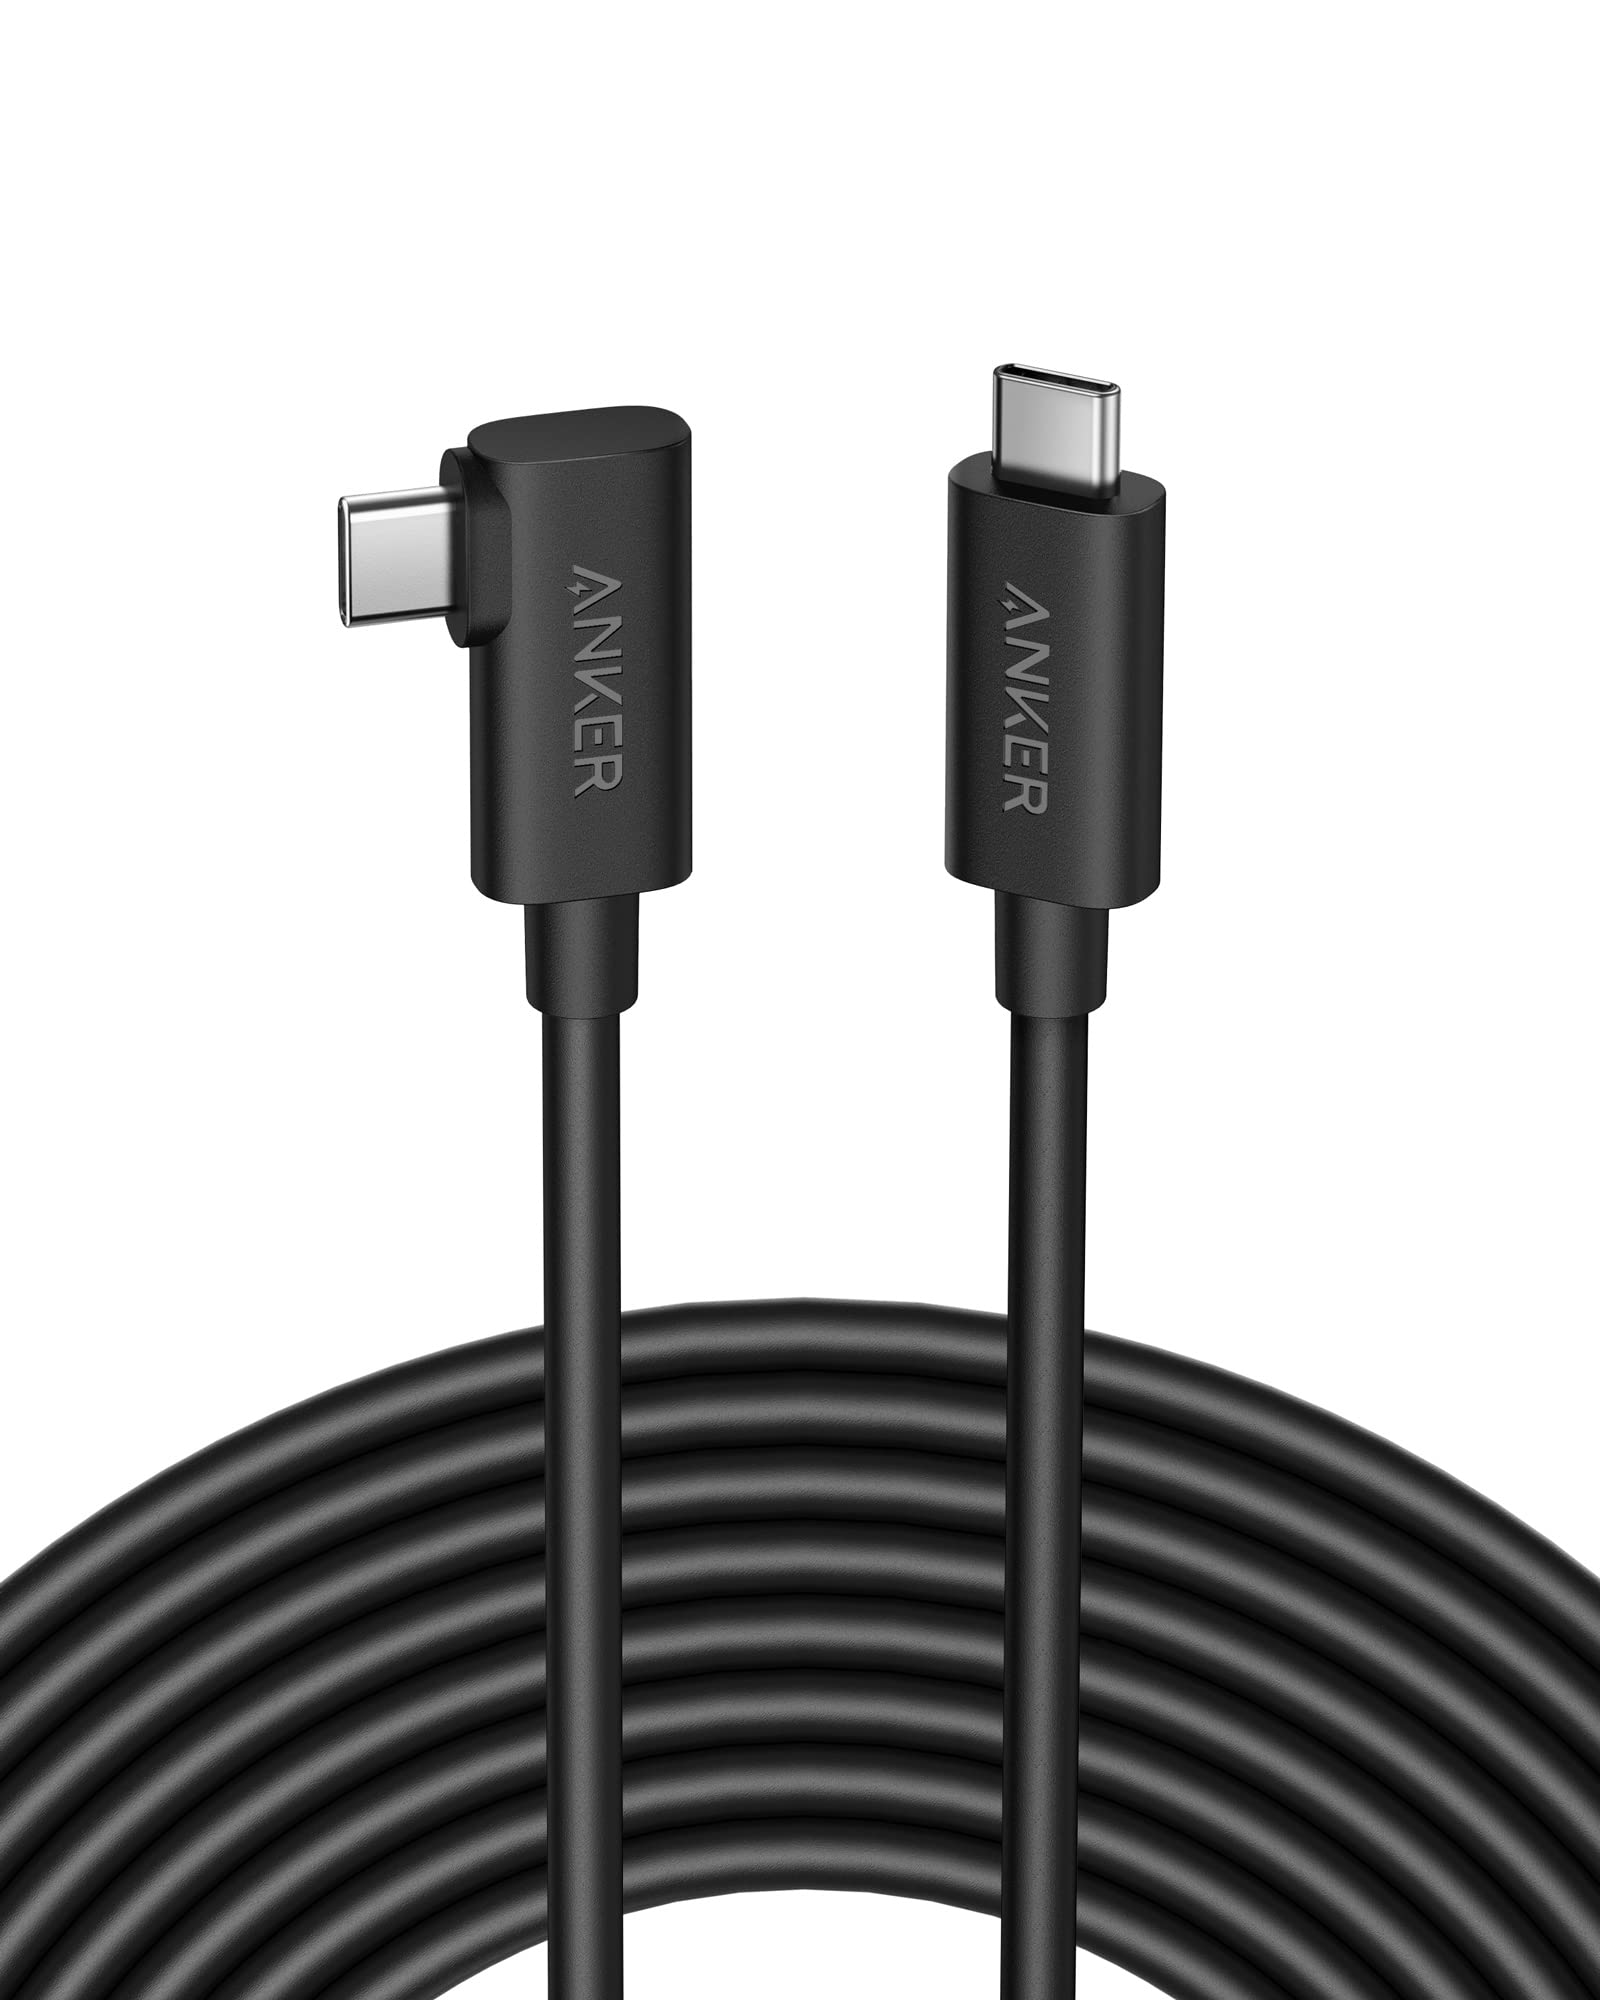 Anker 712 USB-C to USB-C Cable (16 ft Fiber Optic), 10 Gbps High-Speed Data Transfer USB-C Charging Cord Compatible for Oculus Quest 2 VR Headset and USB-C Port Gaming PC